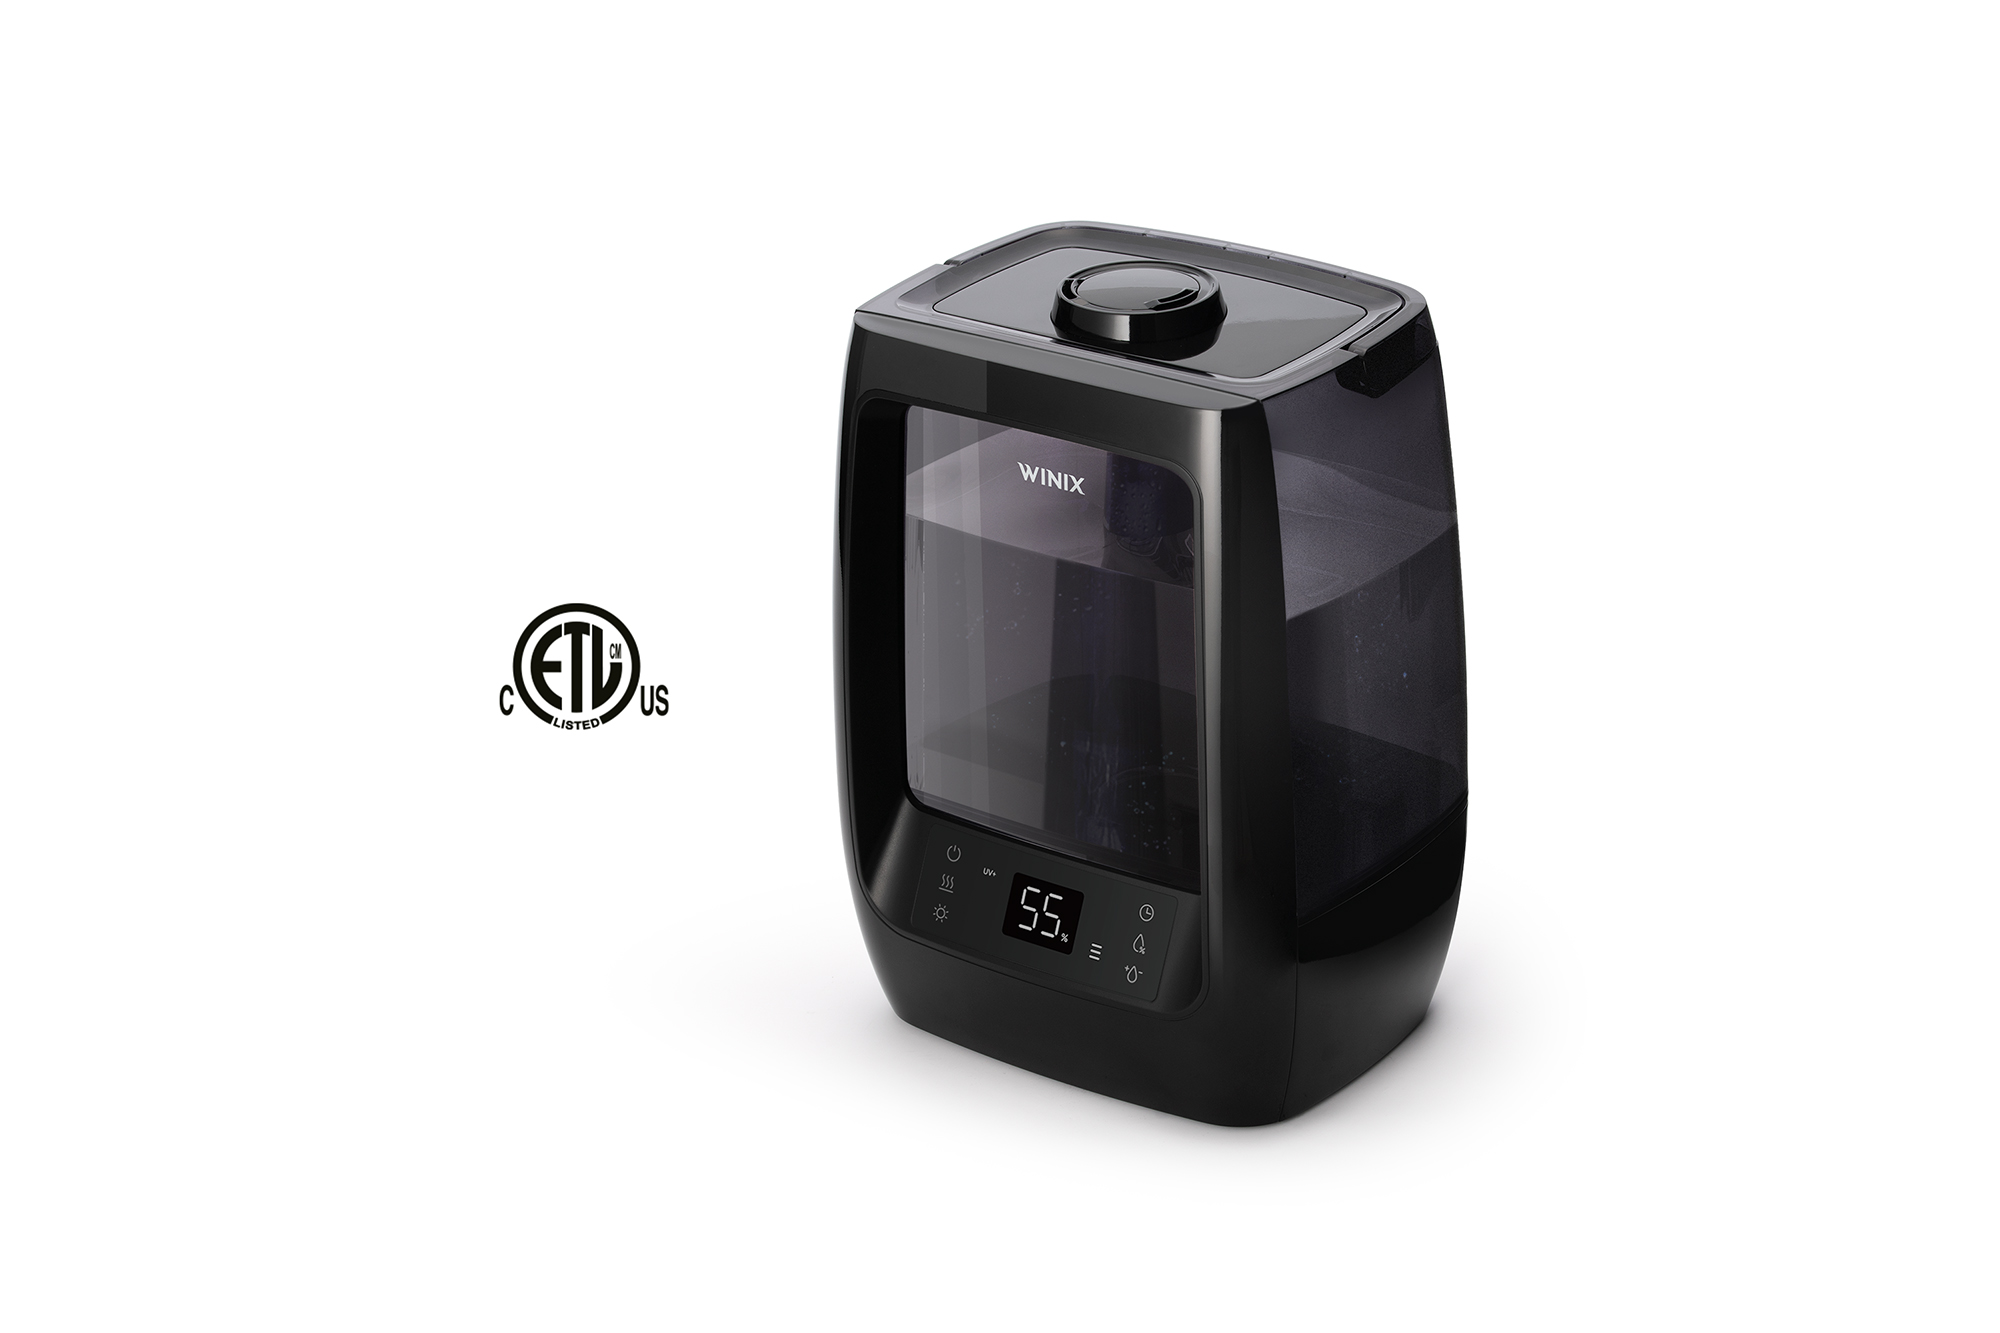 L200 Humidifier front of unit with ETL logo